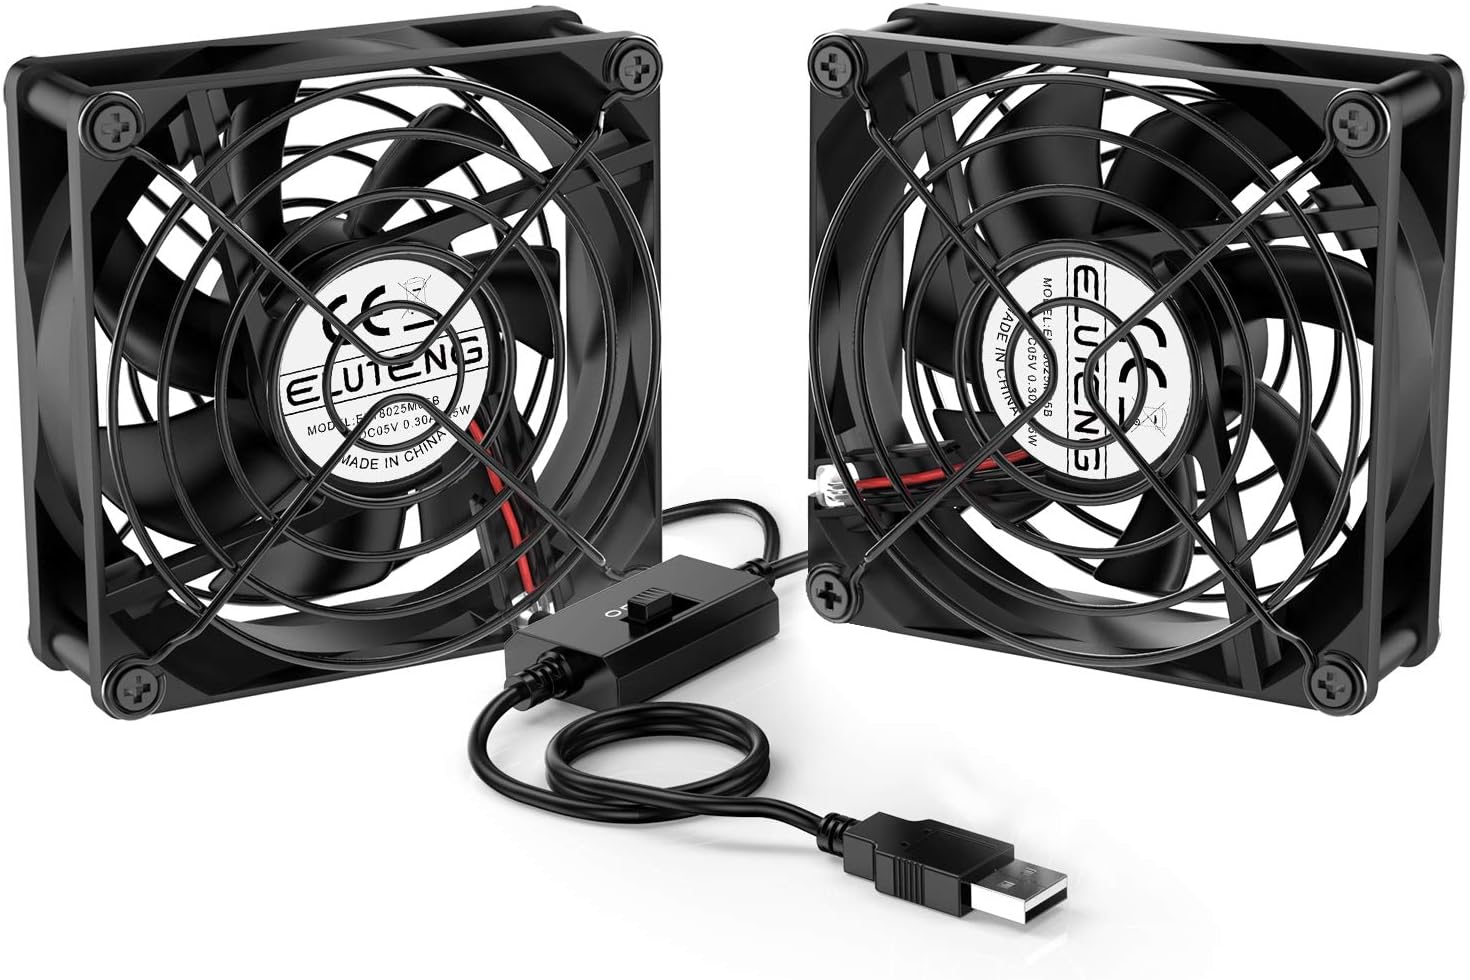 ELUTENG Dual USB Fan 80mm, 3 Speed Adjustable USB Ventilator with 2750RPM 5V Fan for Computer/Laptop/Router/TV Cabinet/DVR/Xbox/Game Console Cooling